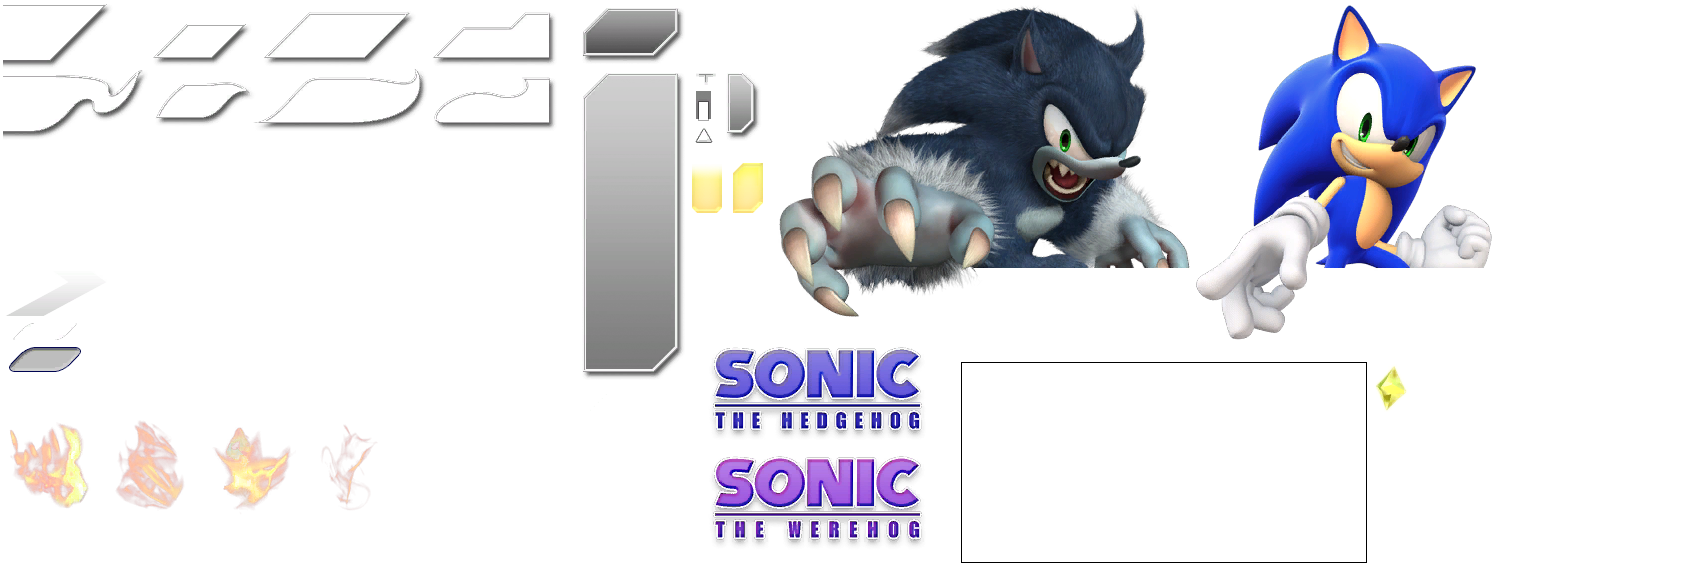 Sonic Unleashed - Results Screen